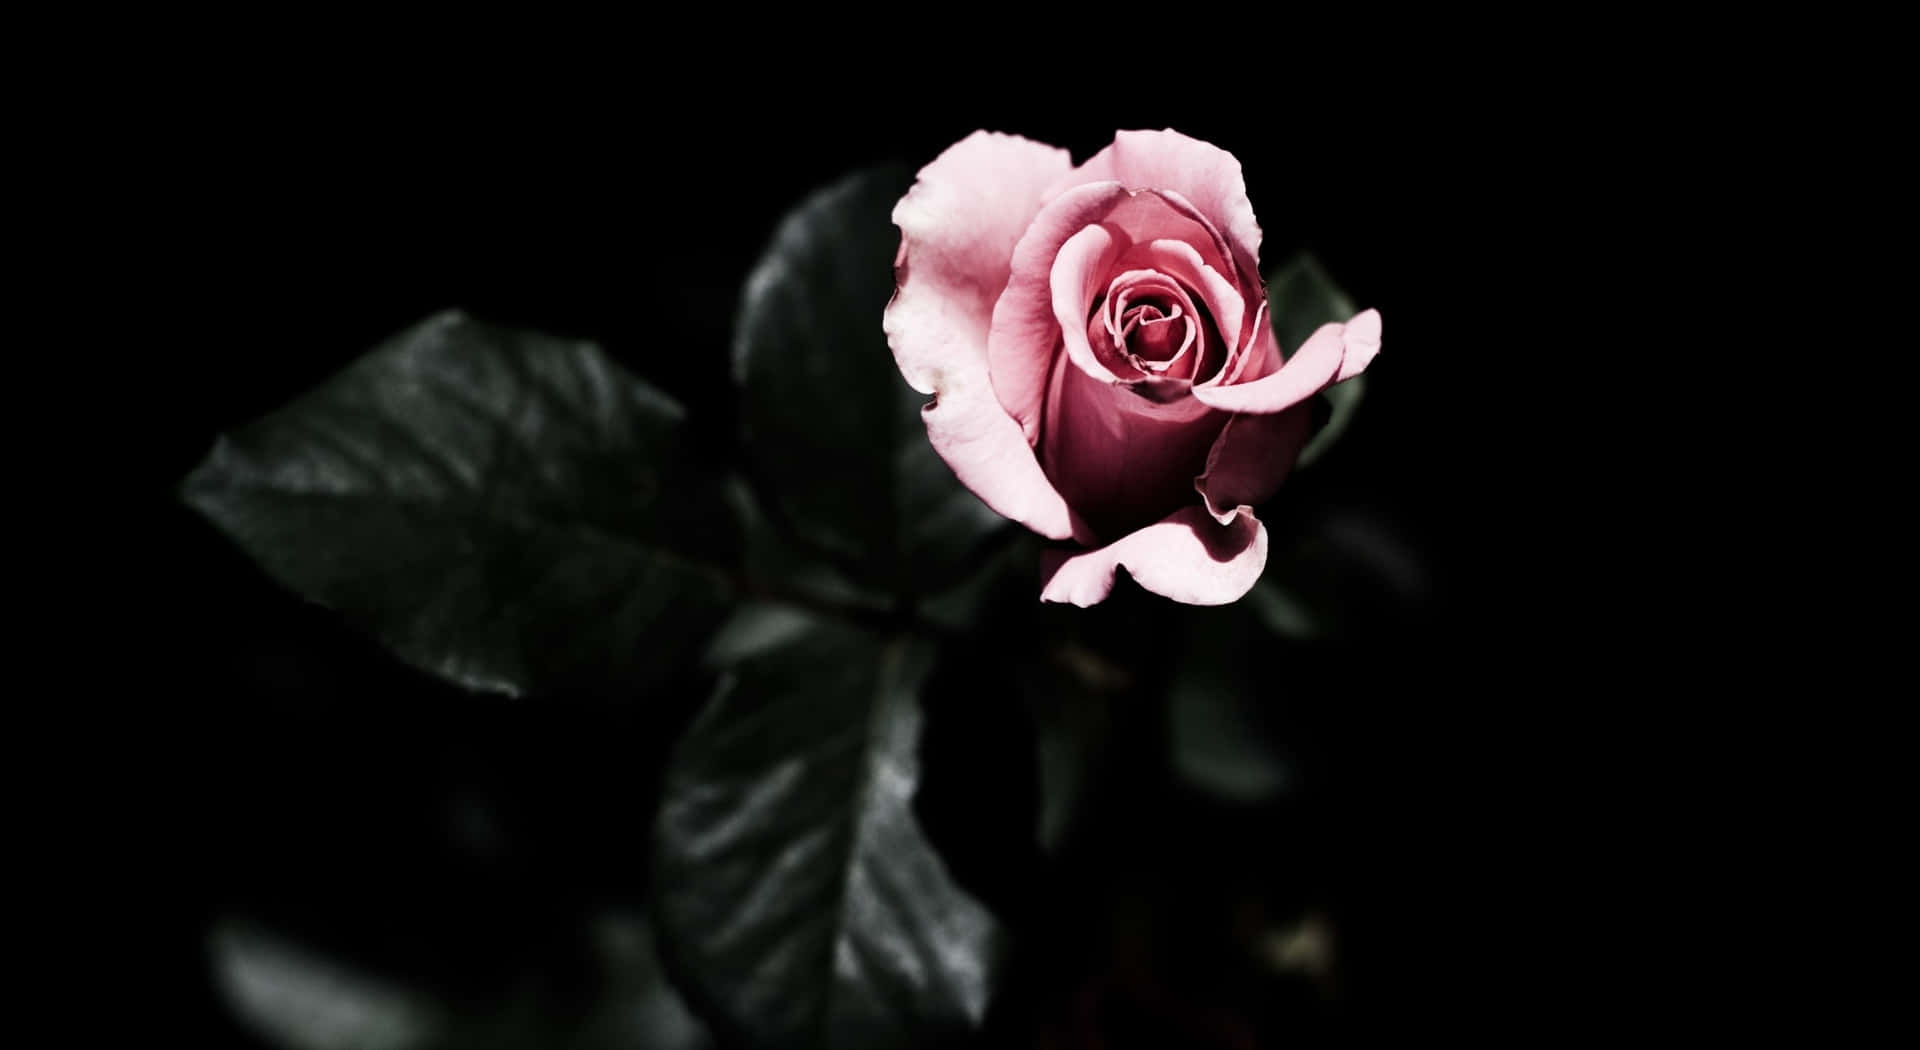 1440p Rose With Dark Leaves Background